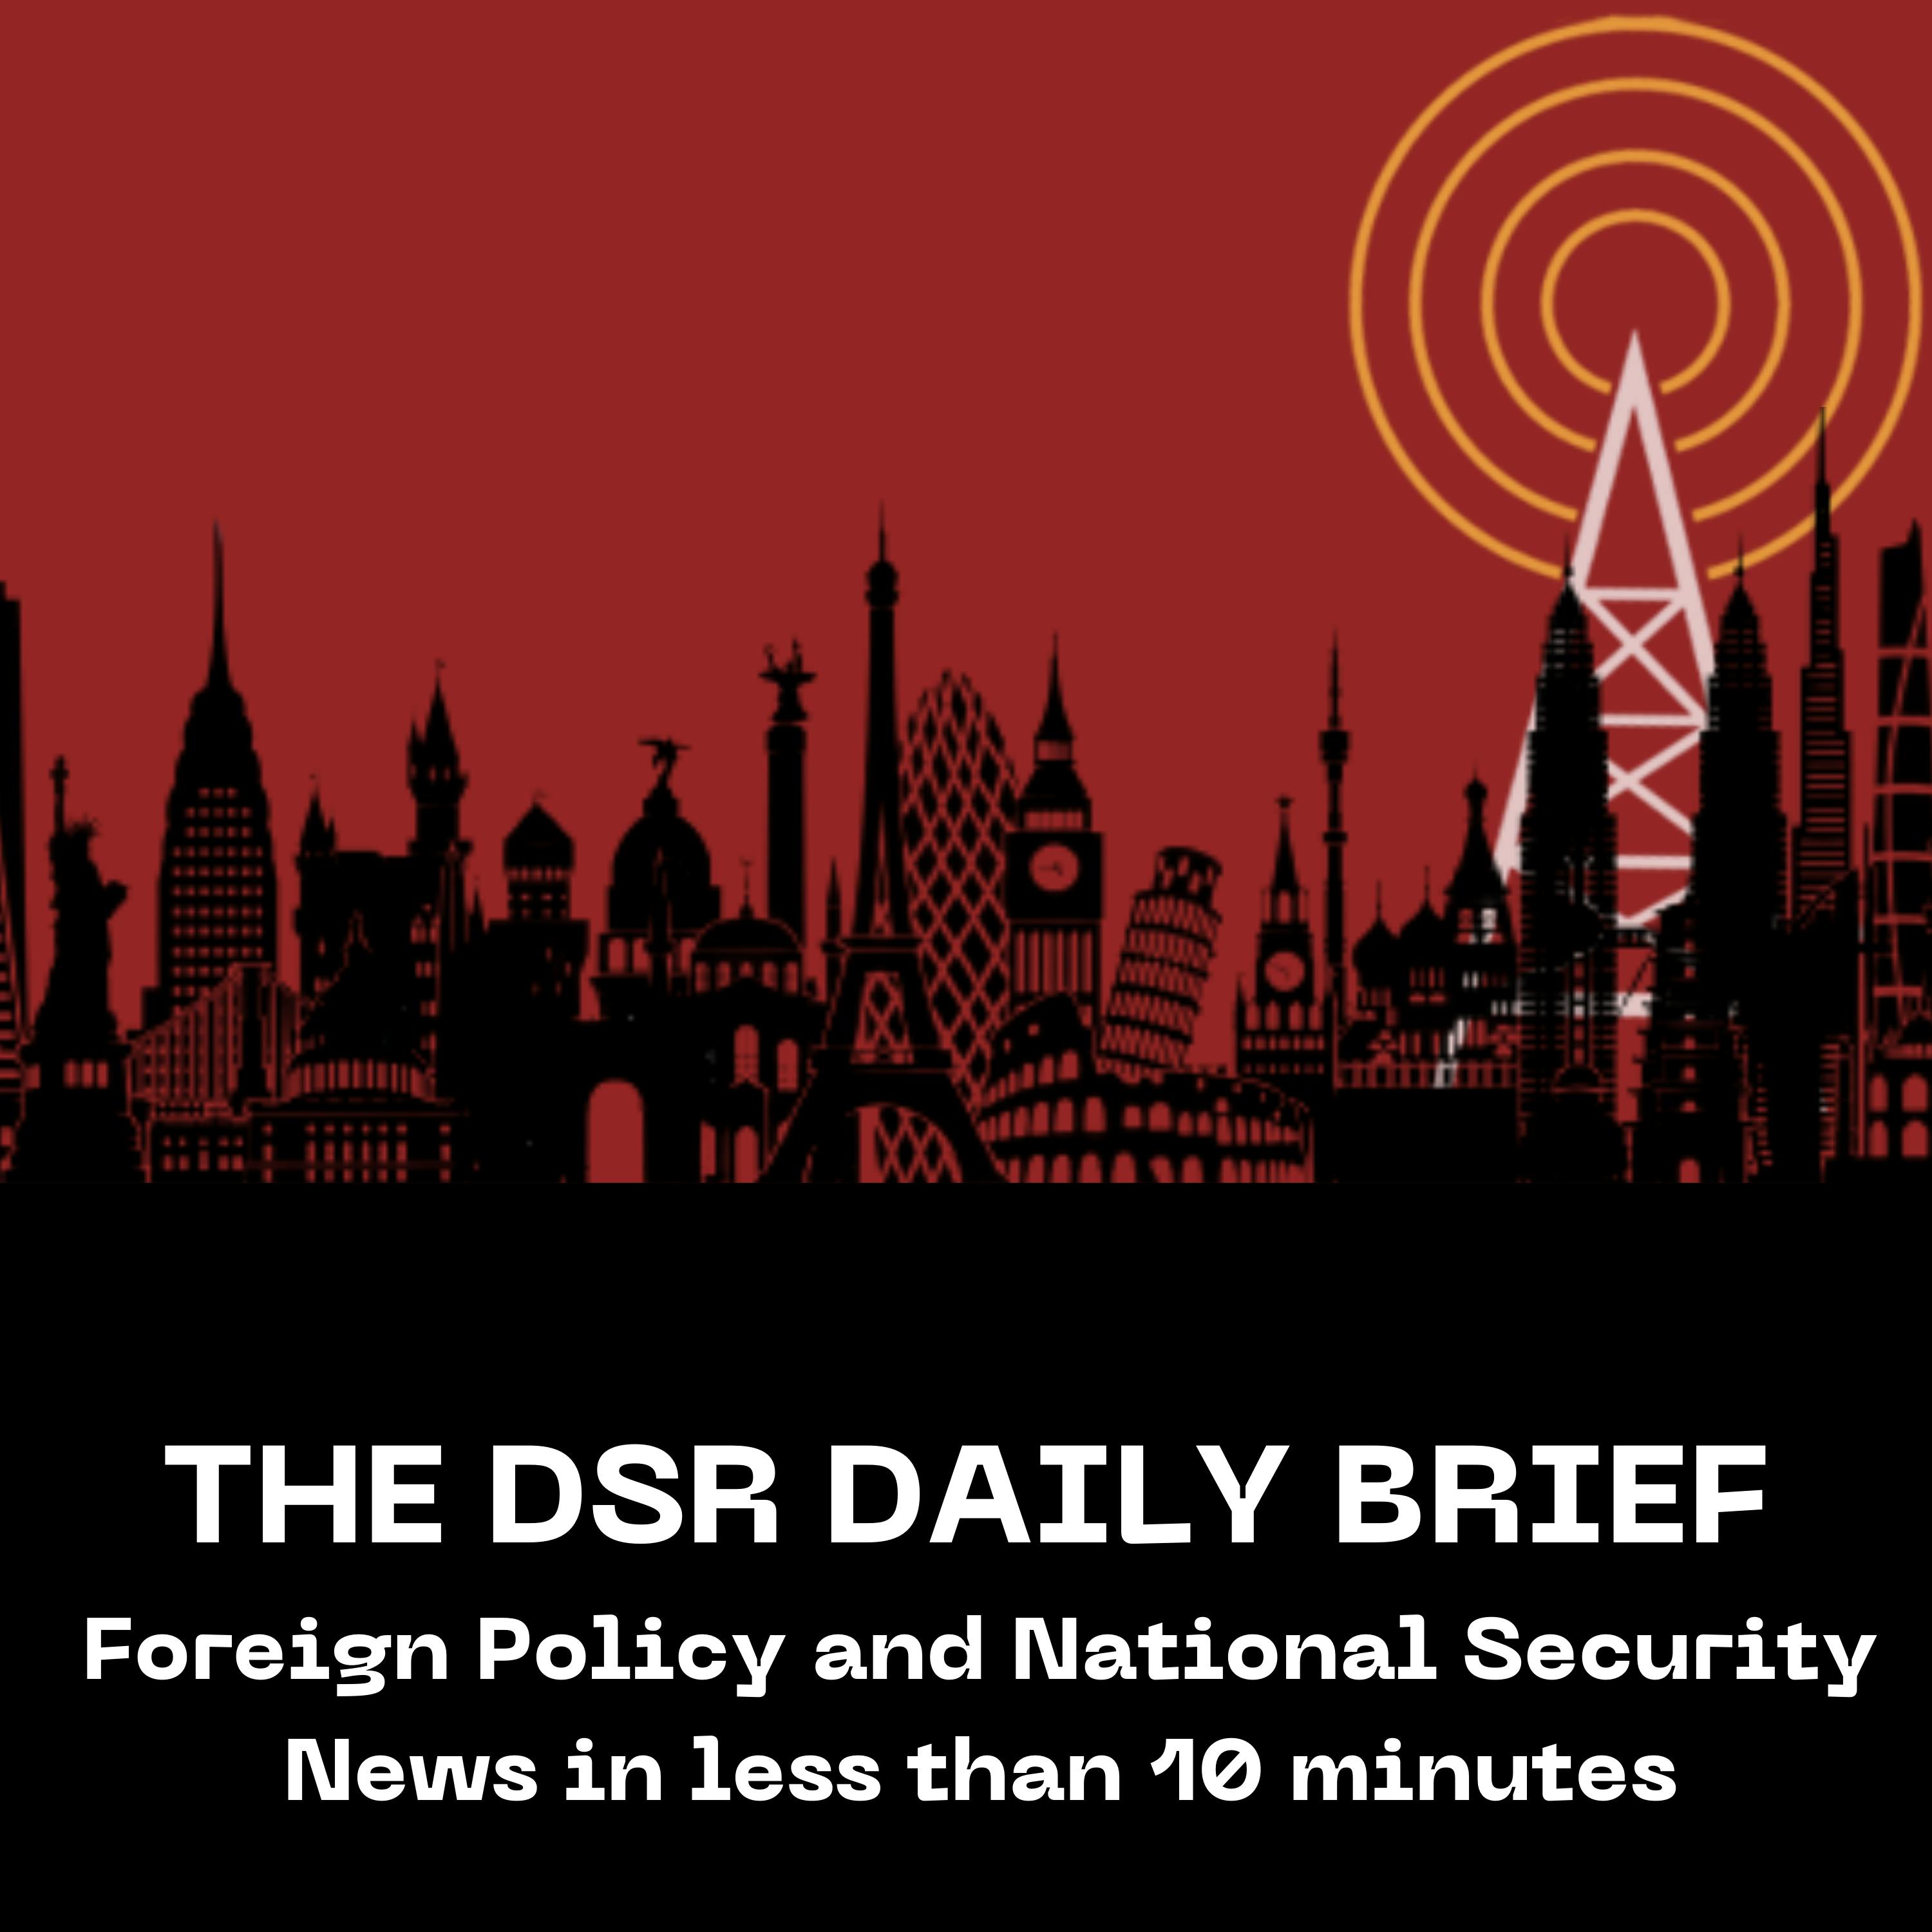 The DSR Daily for December 22: Mass Shooting Shocks Prague, US To Issue New Sanctions on Russia